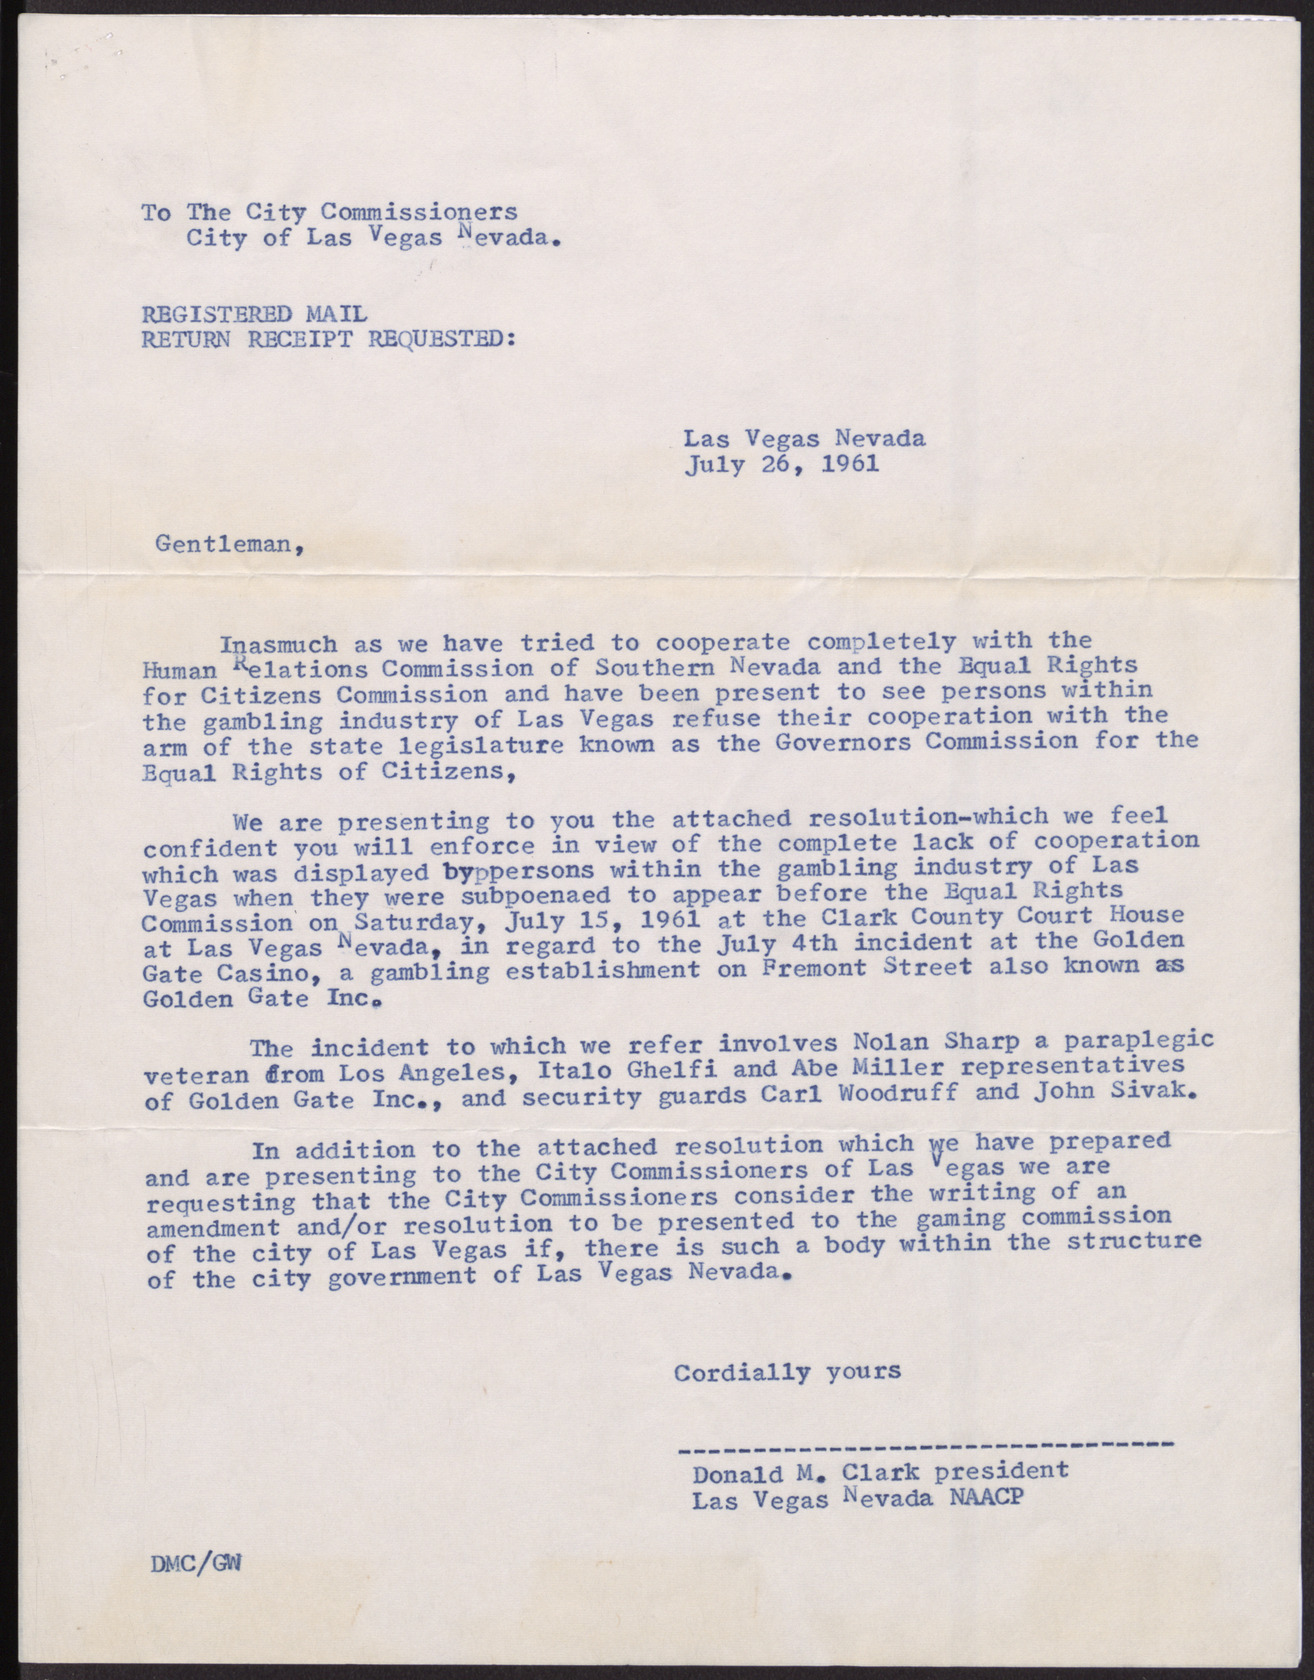 Letter to the Las Vegas City Commissioners from Donald M. Clark, July 26, 1961